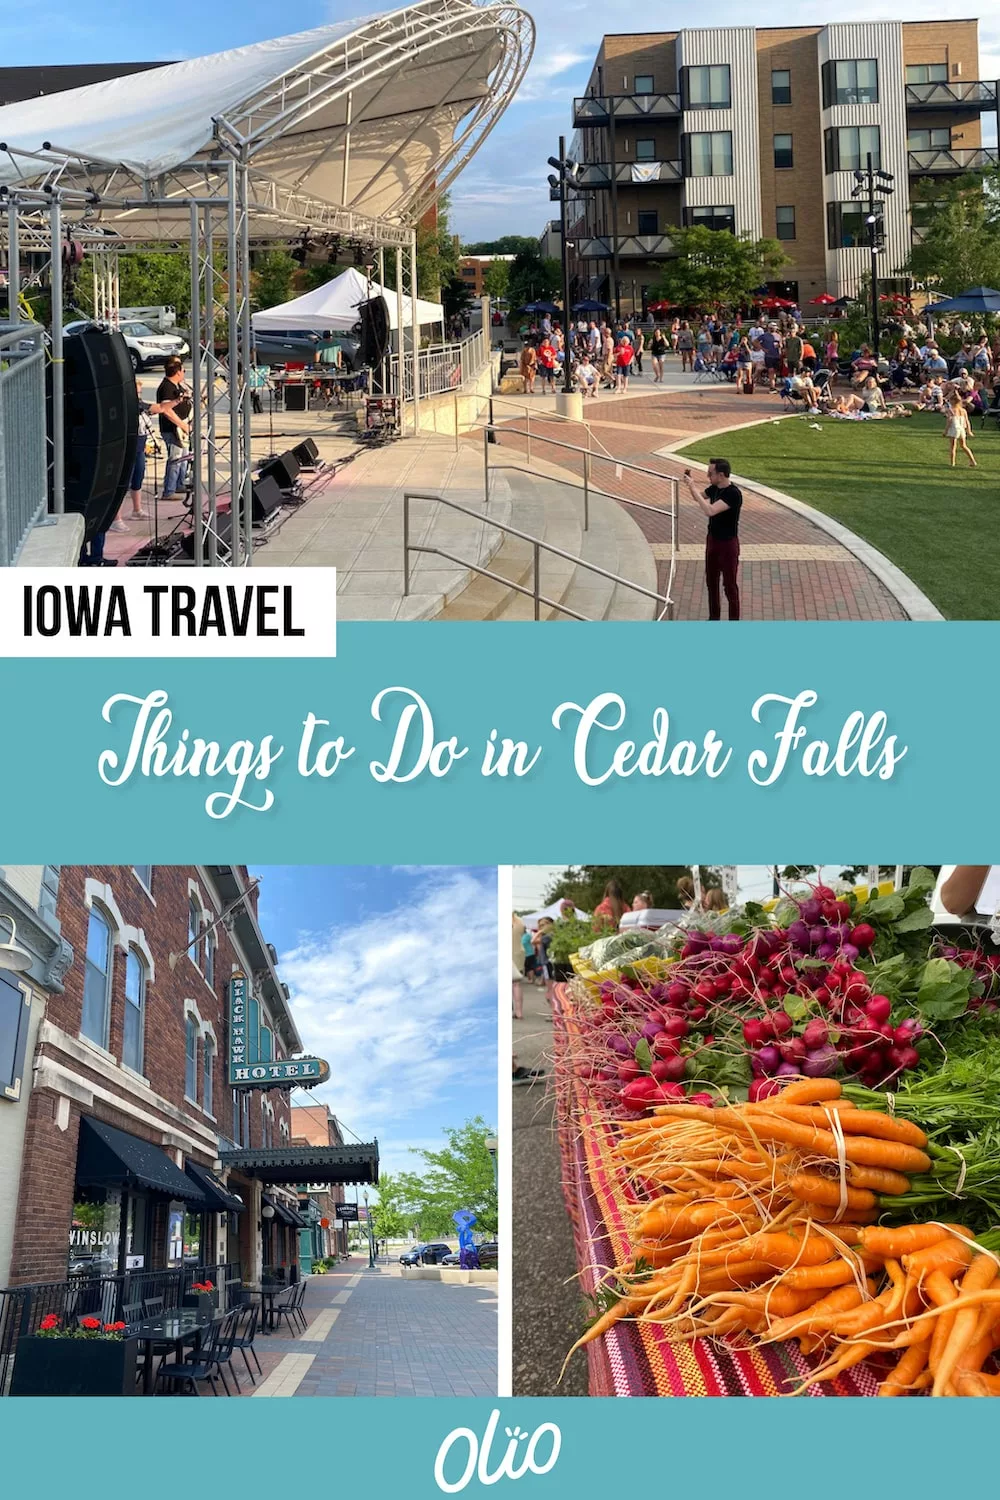 Summer is the perfect time for a weekend getaway, and if you’re looking for an Iowa adventure, look no further than the Cedar Valley. You’ll find plenty of things to do in Cedar Falls, Iowa during the summer, from a bustling downtown district to plentiful patios and everything in between.